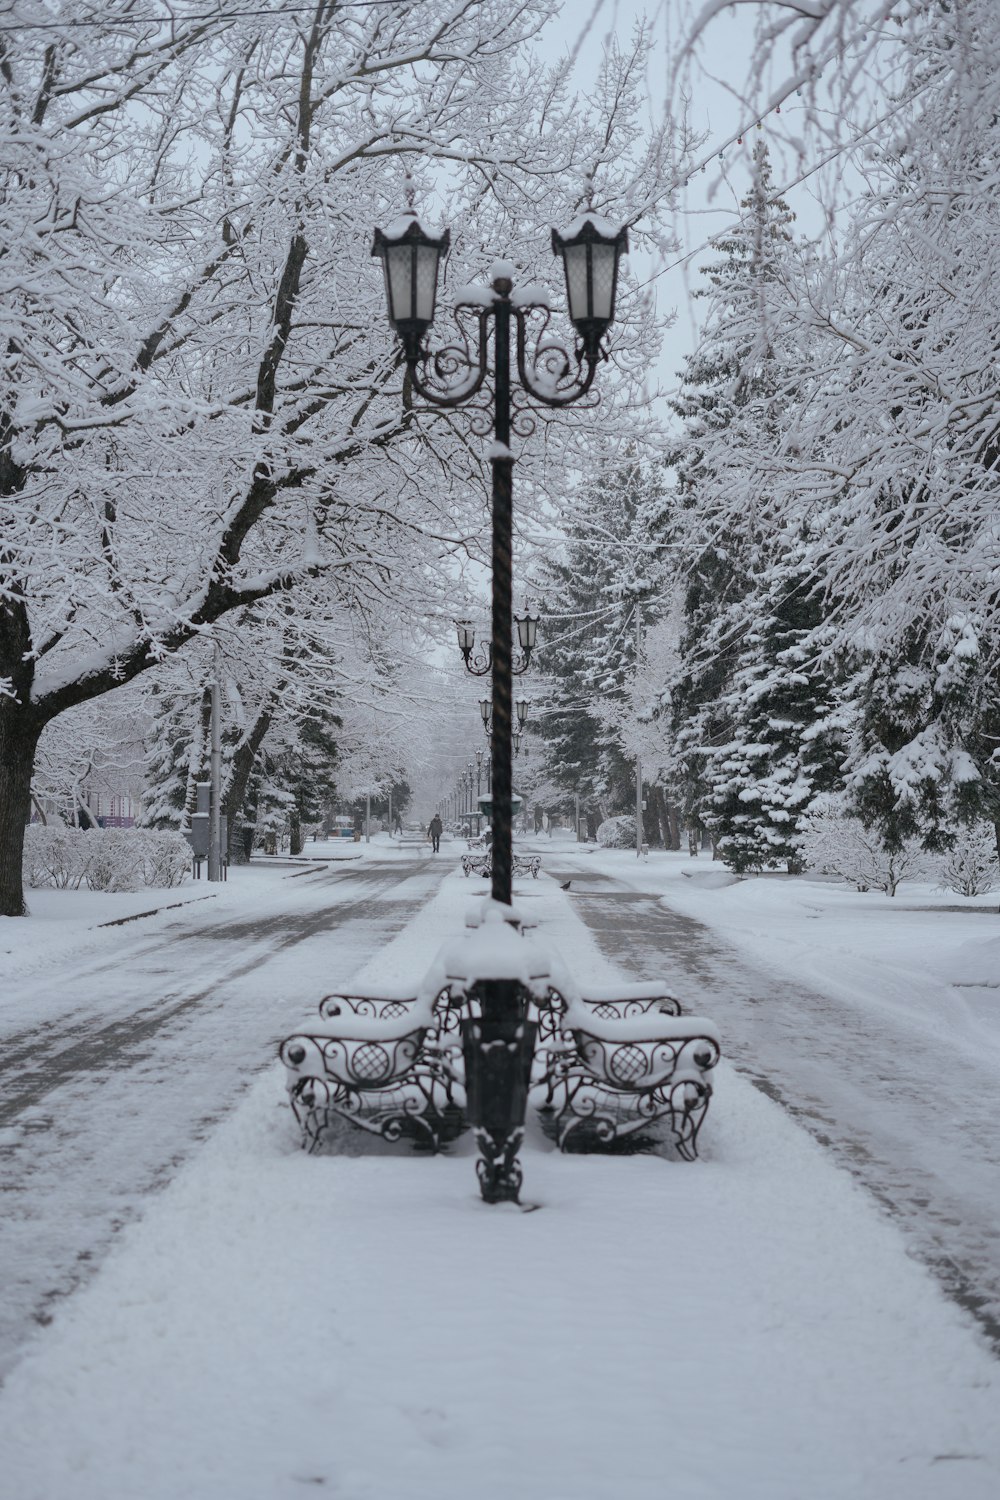 a park bench covered in snow next to a street light